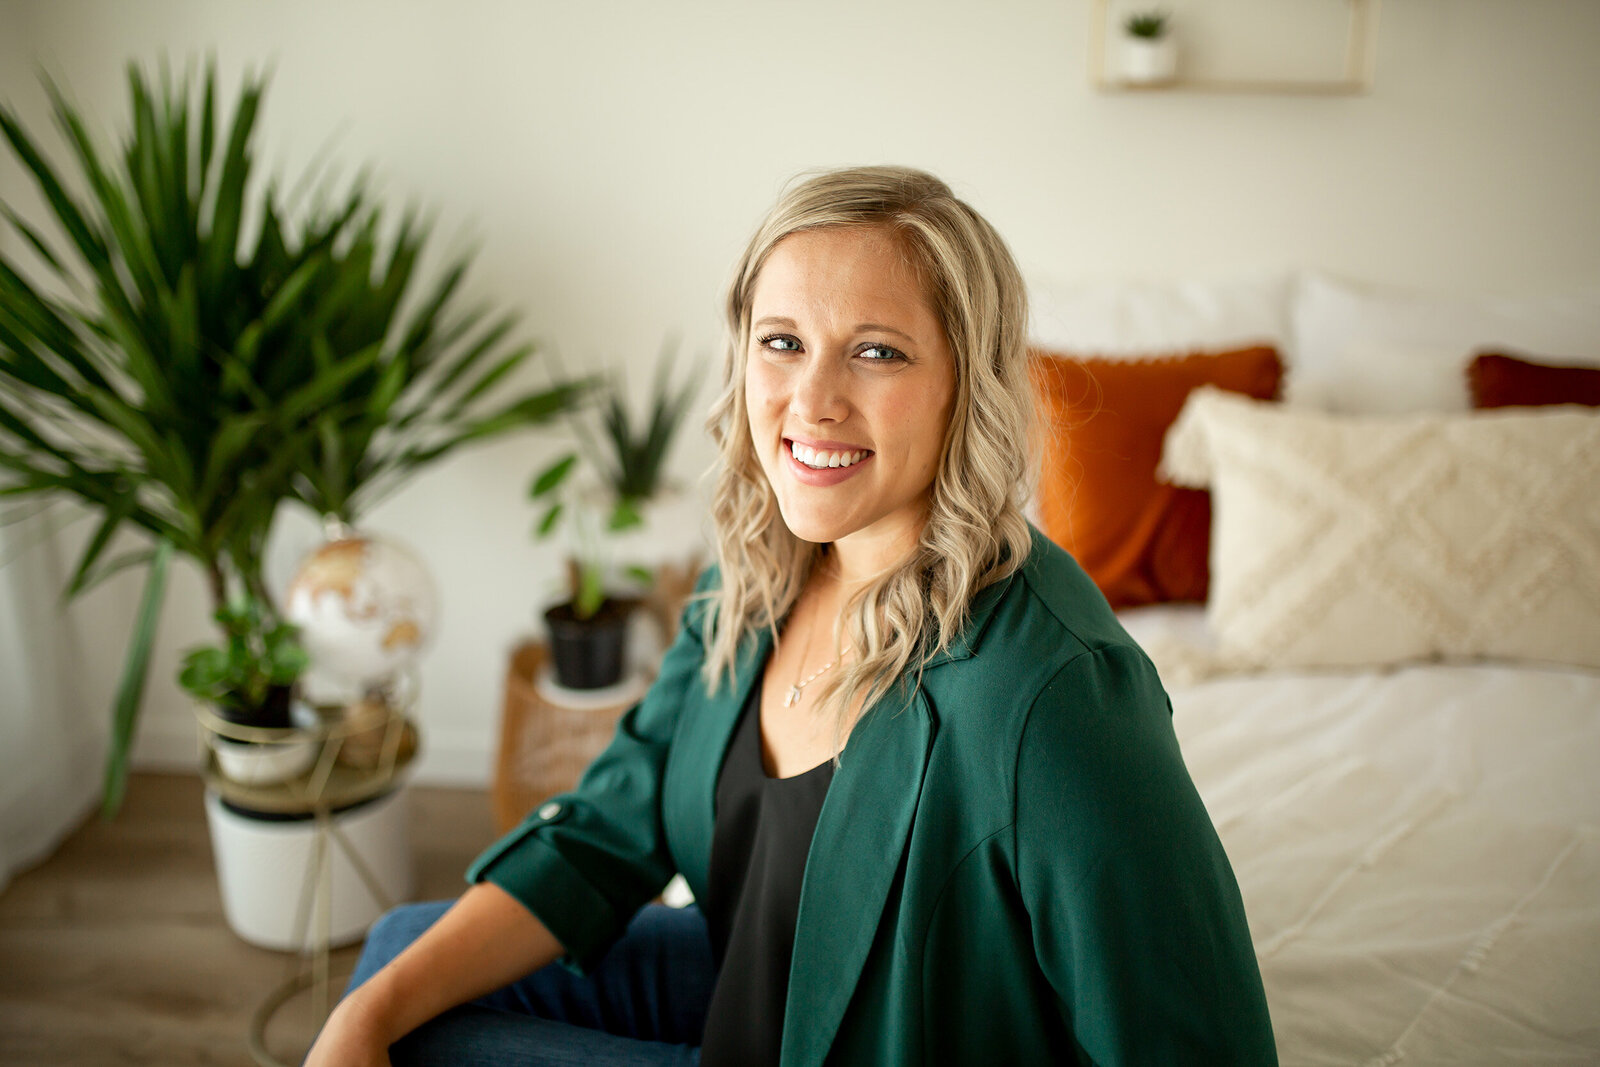 blonde woman sitting on bed smiling